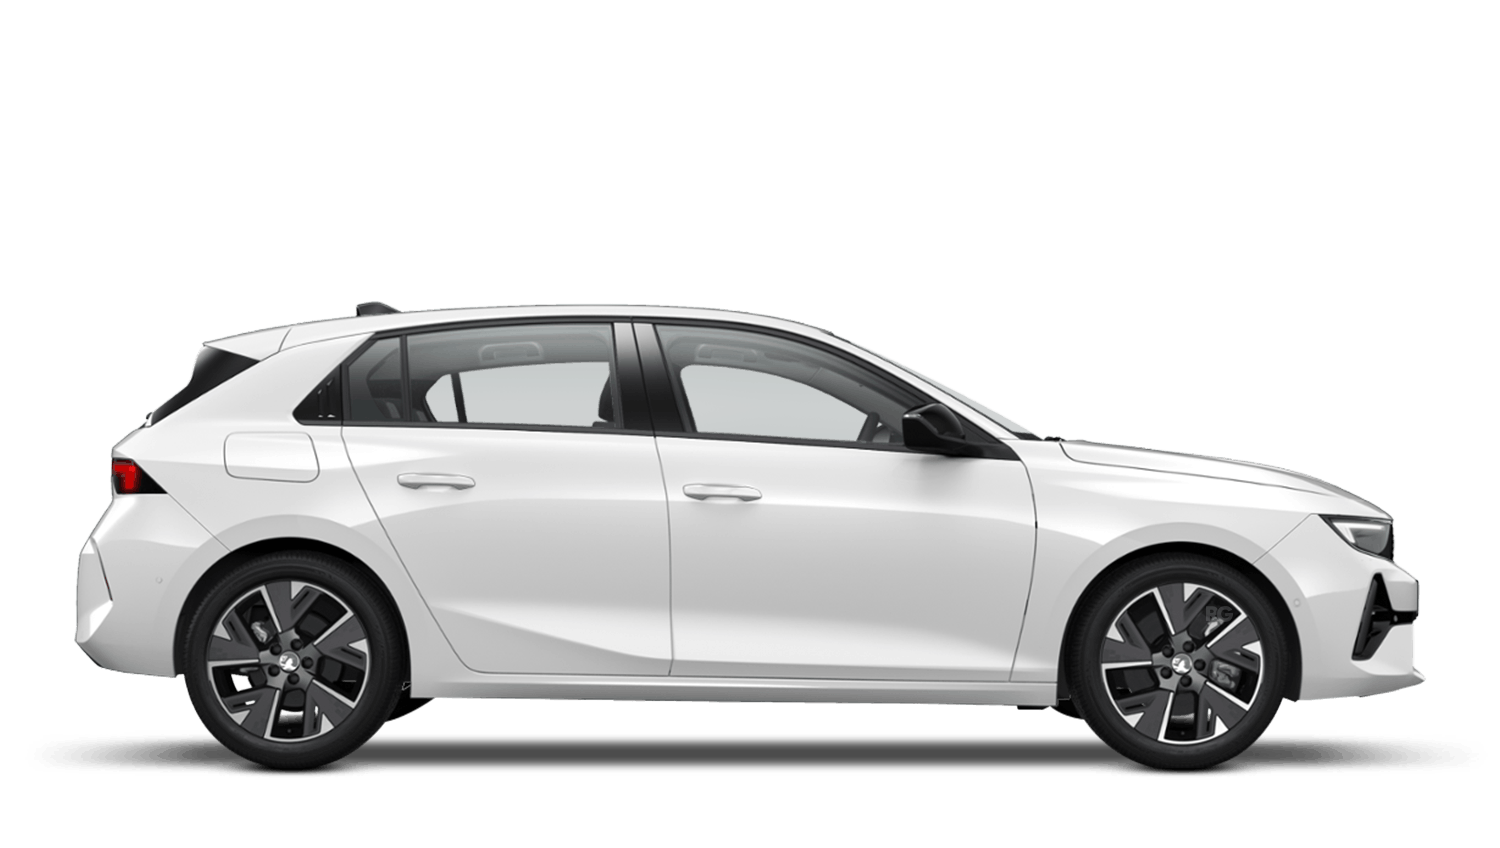 All-New Astra Electric with up to £2,000 deposit contribution 4.5% APR